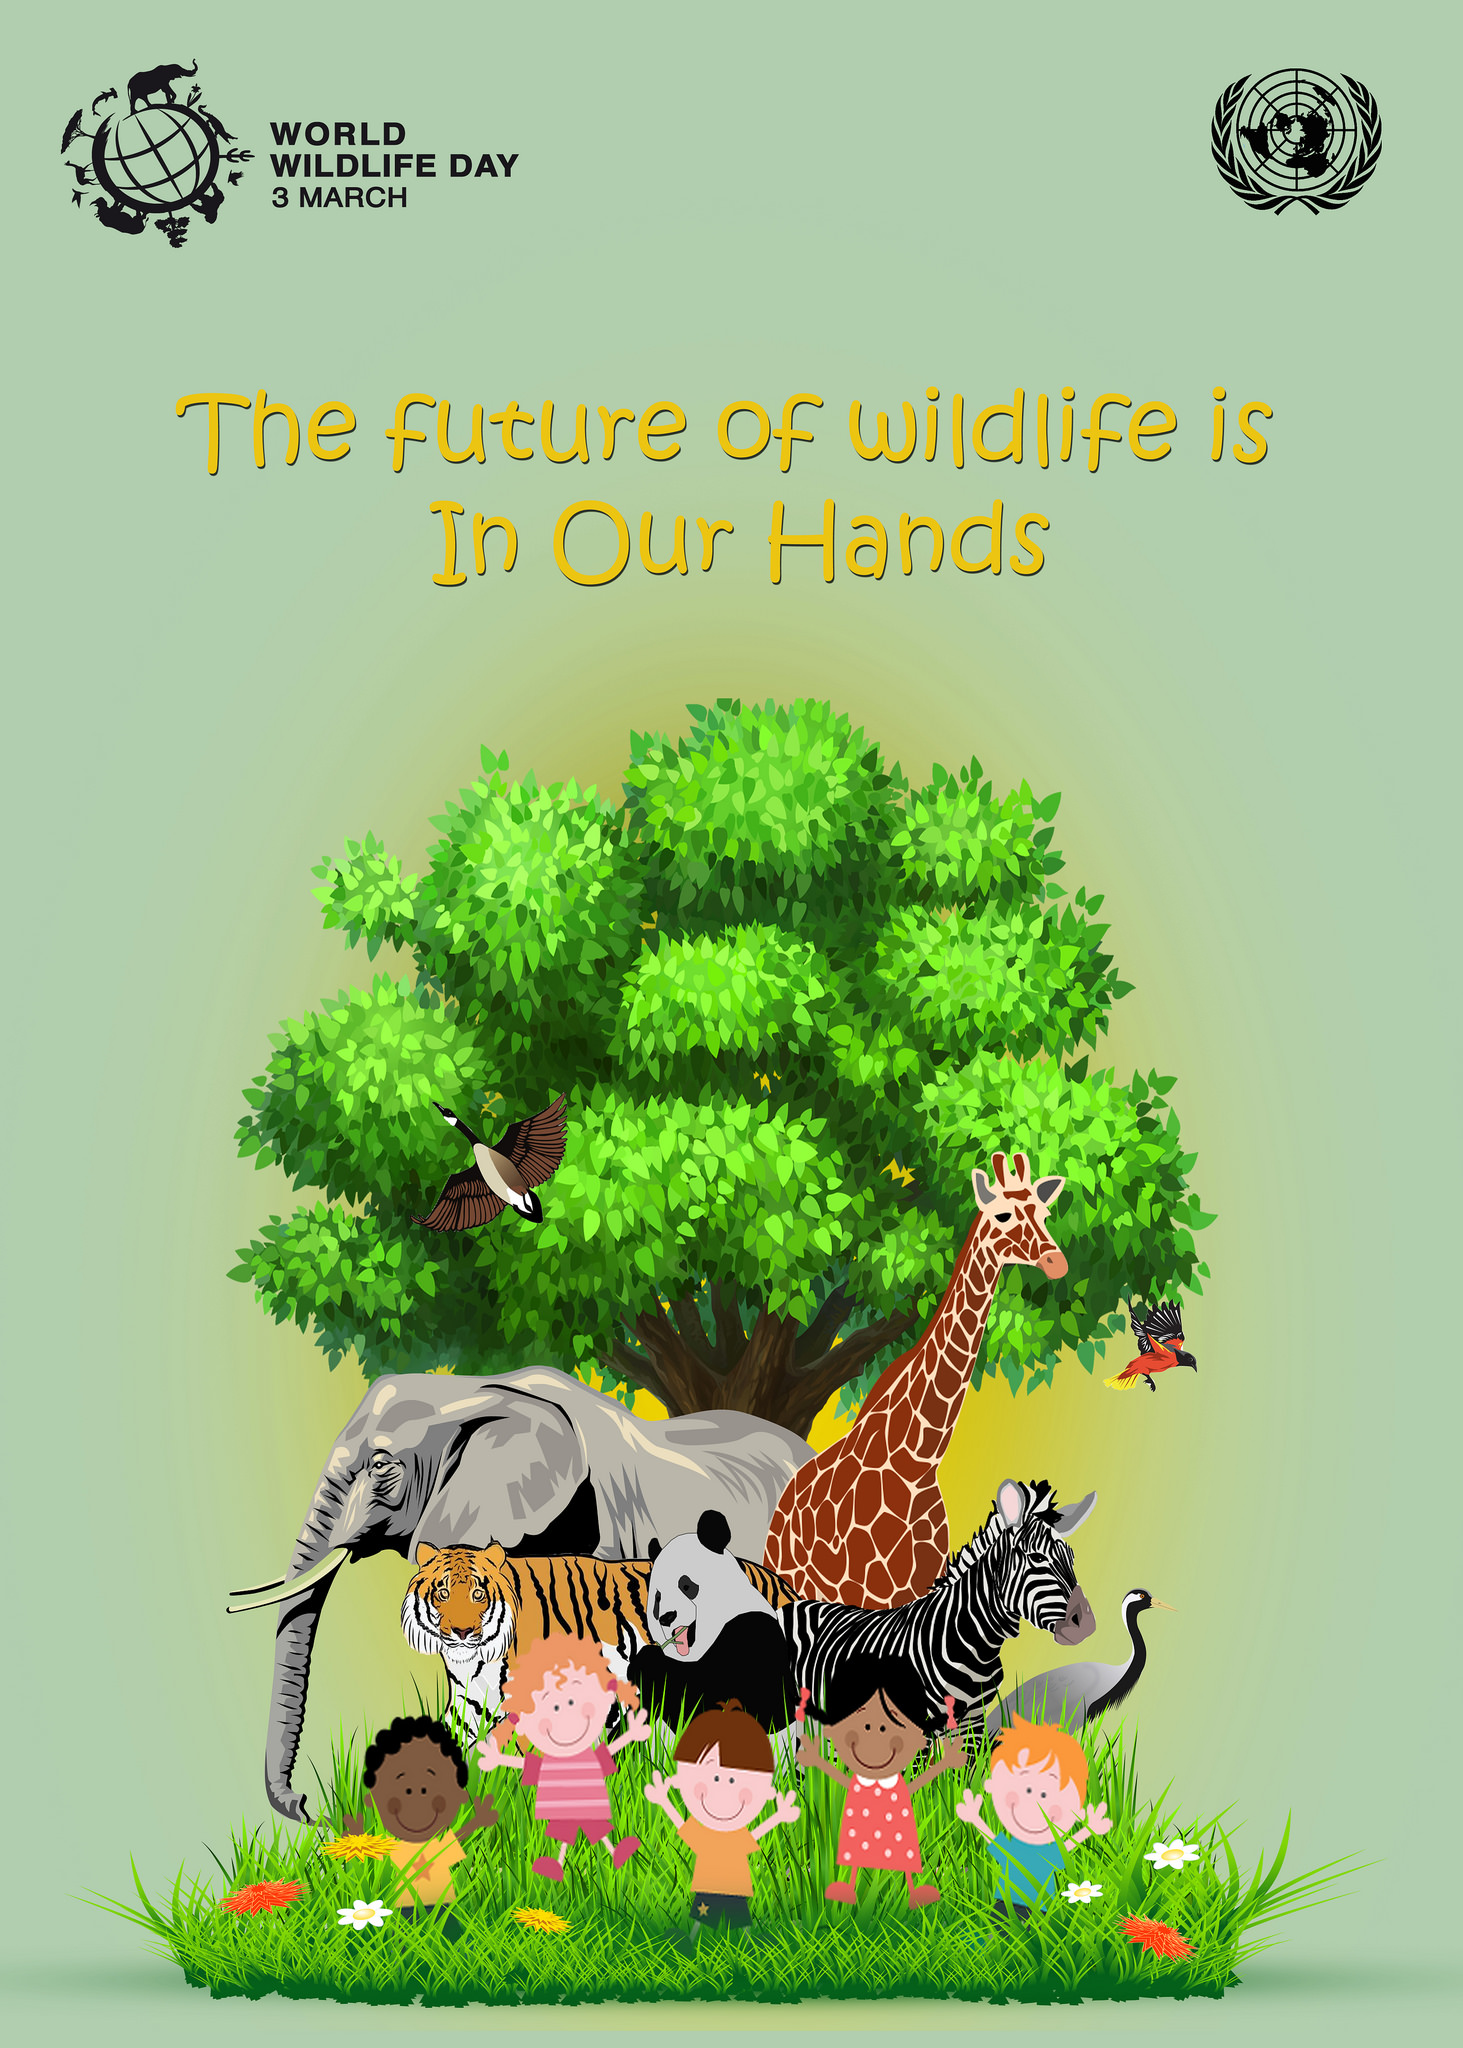 Poster on wildlife conservation